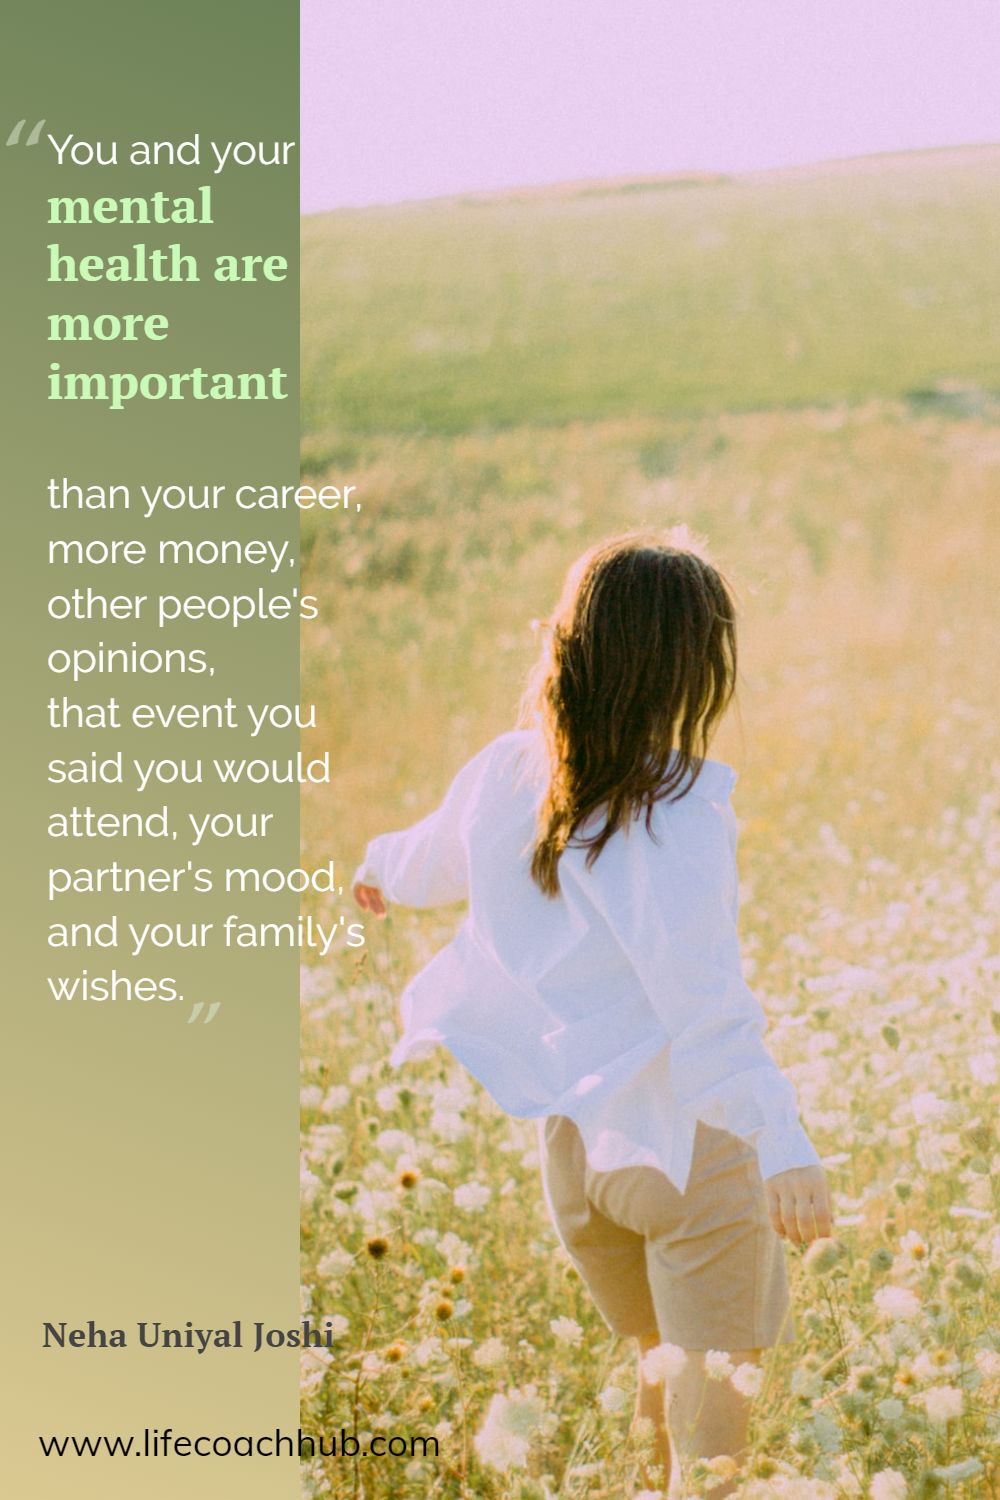 You and your mental health are more important than your career, more money, other people's opinions, that event you said you would attend, your partner's mood and your family's wishes. Neha Joshi Coaching Quote